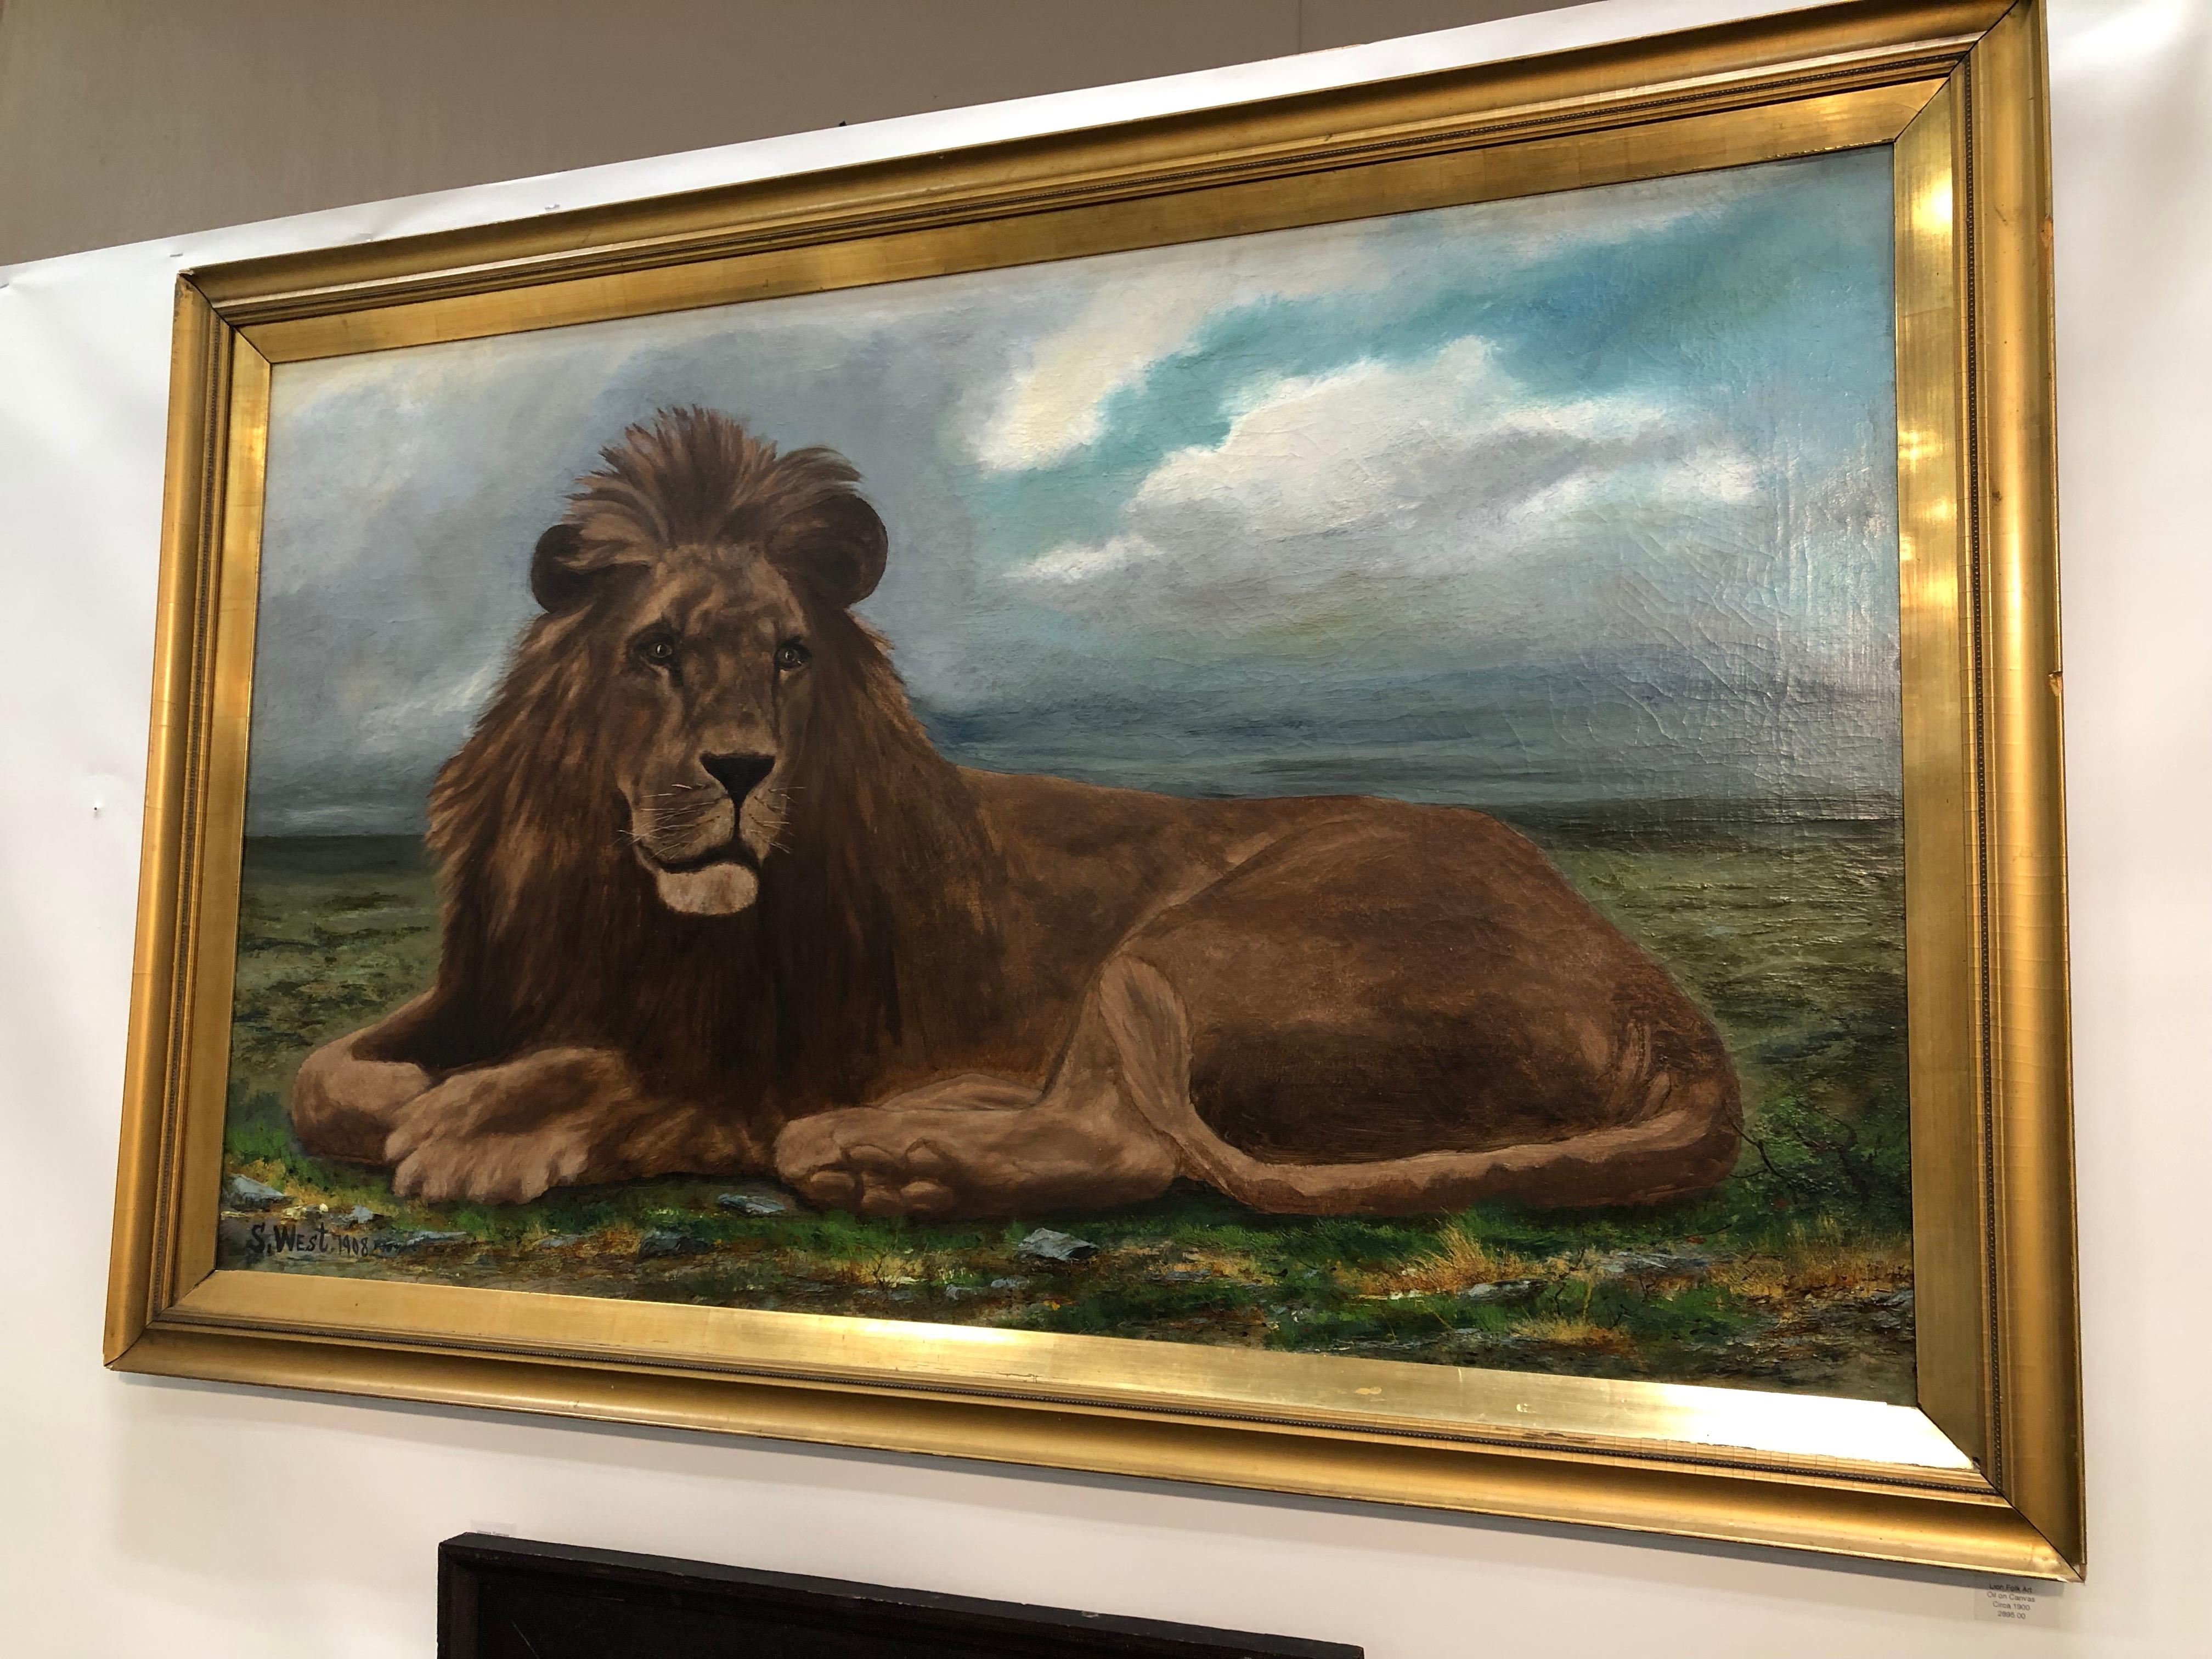 Lion portrait painting Majestic beast oil on canvas signed and dated
S. West Artist Southeastern Pa.